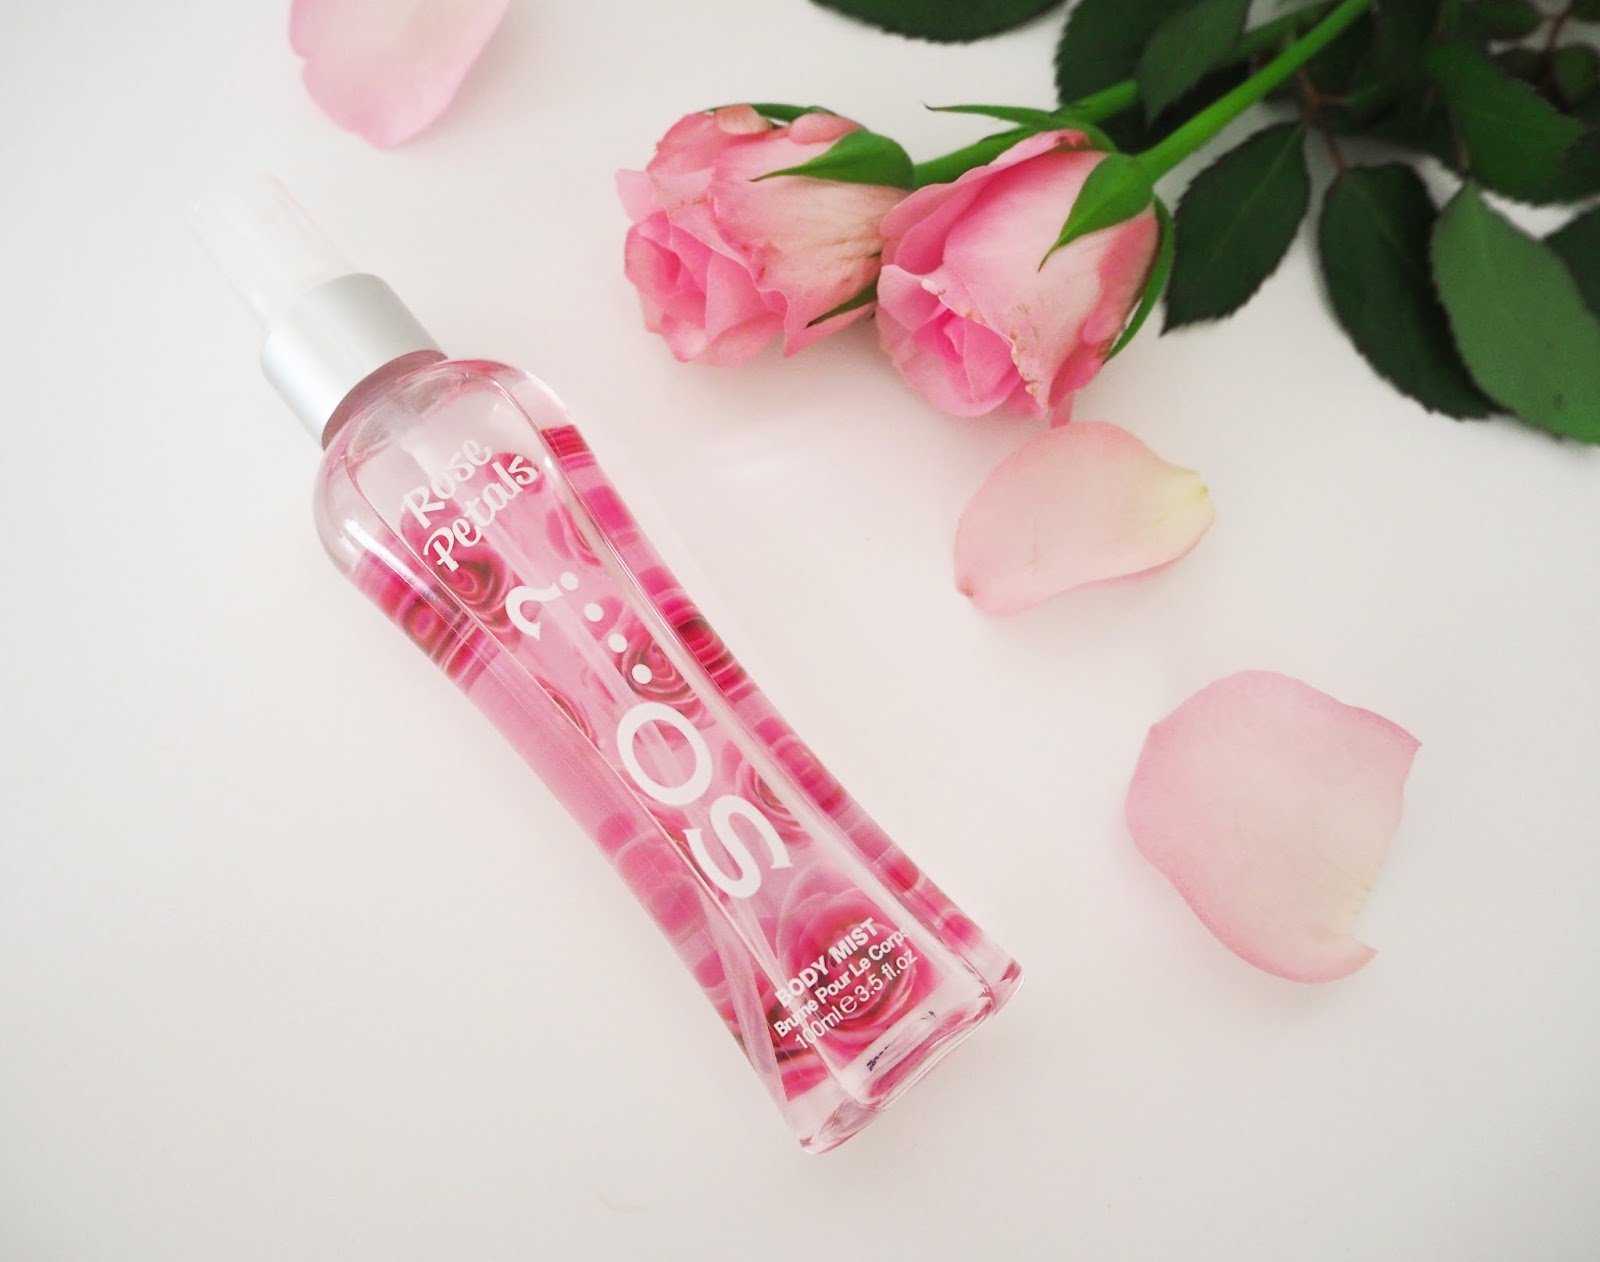 Loves List: February, Katie Kirk Loves, UK Blogger, Beauty Blogger, Make Up Blogger, Beauty Review, Skincare Blogger, Rose Petals Perfume, So Fragrance, Pink Products, Pink Make Up